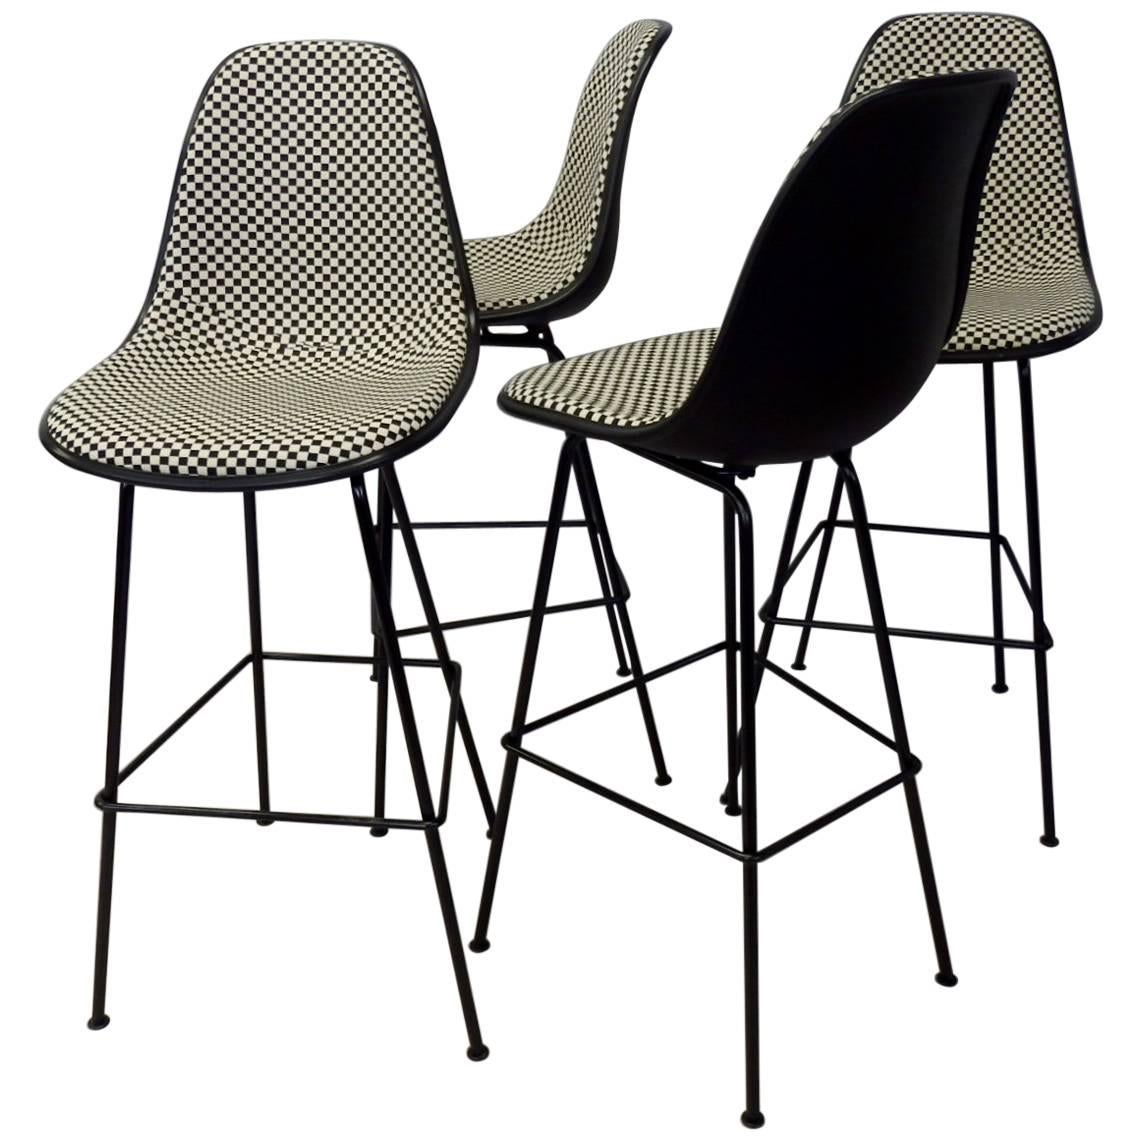 Four Eames Herman Miller Bar Stools with Girard black white Checkerboard Fabric